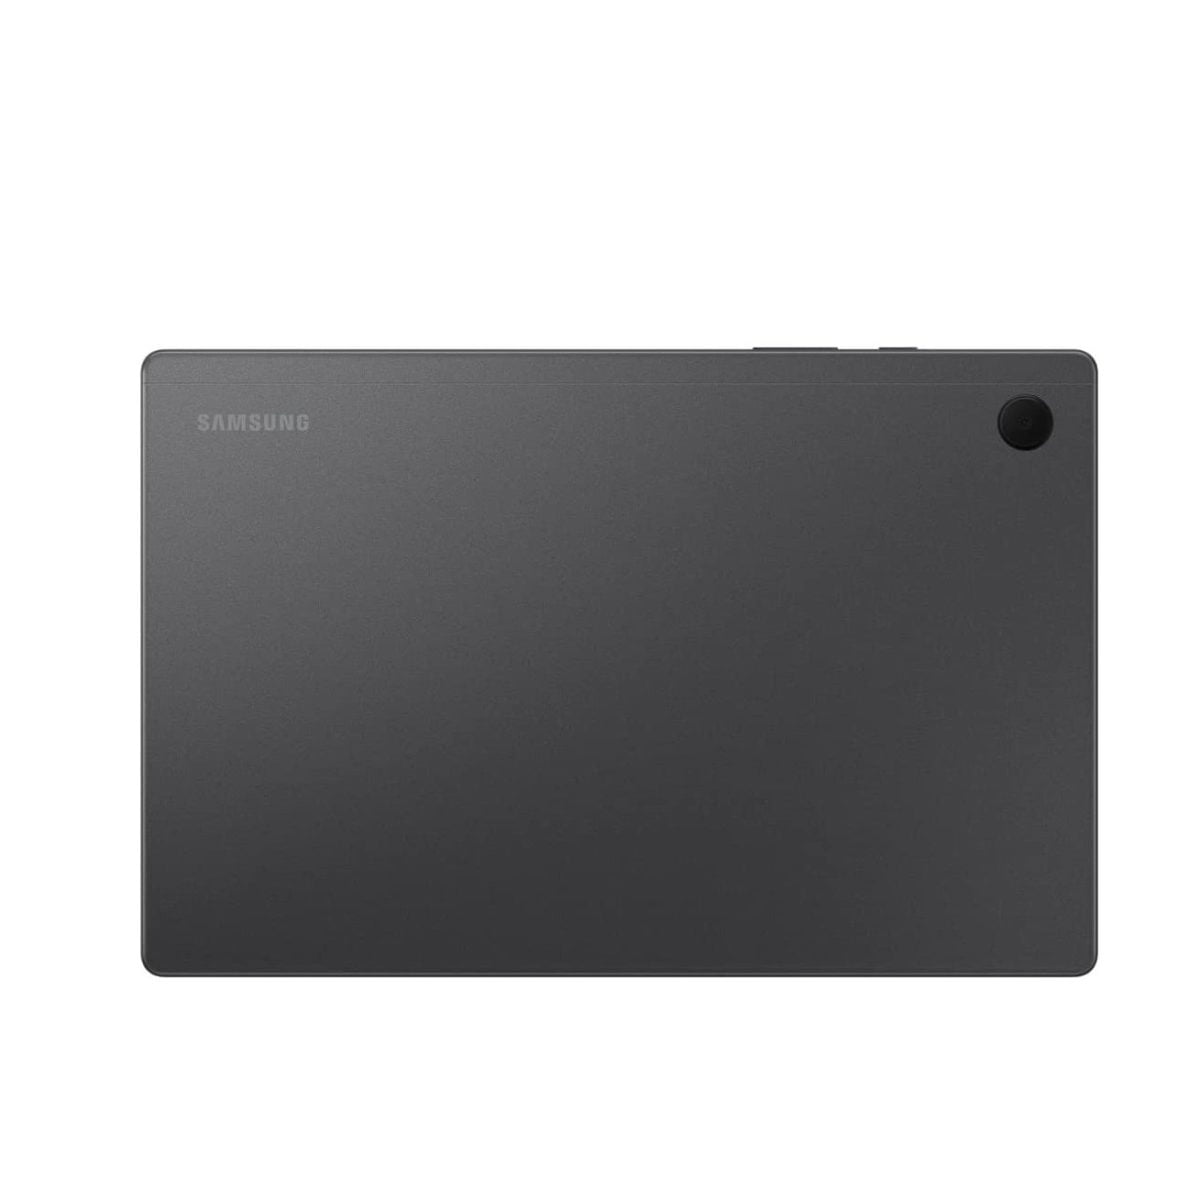 41Qddck4Jul. Ac Sl1200 Samsung &Lt;H1&Gt;Samsung Galaxy Tab A8 64Gb - ‎Dark Gray&Lt;/H1&Gt; &Lt;Ul Class=&Quot;A-Unordered-List A-Vertical A-Spacing-Mini&Quot;&Gt; &Lt;Li&Gt;&Lt;Span Class=&Quot;A-List-Item&Quot;&Gt;A Screen Everyone Will Love: Whether Your Family Is Streaming Or Video Chatting With Friends, The Galaxy Tab A8 Tablet Brings Out The Best In Every Moment On A 10.5&Quot; Lcd Screen&Lt;/Span&Gt;&Lt;/Li&Gt; &Lt;Li&Gt;&Lt;Span Class=&Quot;A-List-Item&Quot;&Gt;Power And Storage For All: Get The Power, Storage And Speed Your Family Needs With An Upgraded Chipset And Plenty Of Room To Keep Files — Up To 128Gb Of Storage; A Long-Lasting Battery Lets You Go Unplugged For Hours To Keep The Family Fun Going&Lt;/Span&Gt;&Lt;/Li&Gt; &Lt;Li&Gt;&Lt;Span Class=&Quot;A-List-Item&Quot;&Gt;Charge Fast, Power For Hours: Go For Hours On A Single Charge* And Back To 100% With The Fast Charging Usb C Port; *Battery Life May Vary Depending On Network Environment, Usage Patterns And Other Factors&Lt;/Span&Gt;&Lt;/Li&Gt; &Lt;Li&Gt;&Lt;Span Class=&Quot;A-List-Item&Quot;&Gt;Galaxy Ecosystem Experience: Open Up A New World Of Convenient Possibilities With The Galaxy Ecosystem Experience — Your Devices, Including Your Phone, Laptop Computer, And Tablet, All Automatically Talk To One Another Seamlessly&Lt;/Span&Gt;&Lt;/Li&Gt; &Lt;Li&Gt;&Lt;Span Class=&Quot;A-List-Item&Quot;&Gt;Your Notes, All In One Place: Do More With Your Notes With Galaxy Connectivity That Automatically Syncs Everything From To-Do Lists To School Work, Whether You’re On Your Tablet, Phone Or Watch&Lt;/Span&Gt;&Lt;/Li&Gt; &Lt;Li&Gt;&Lt;Span Class=&Quot;A-List-Item&Quot;&Gt;Kids Digital Learning: Children Can Enjoy Access To Samsung Kids, A Library Of Safe And Fun Games, Books And Videos That Are Kid Friendly And Parent Approved&Lt;/Span&Gt;&Lt;/Li&Gt; &Lt;Li&Gt;&Lt;Span Class=&Quot;A-List-Item&Quot;&Gt;Easiest. Transfer. Ever: No Matter What Operating System You'Re Using, Smart Switch Makes It A Breeze To Move Your Data And Favorite Files In Three Easy Steps&Lt;/Span&Gt;&Lt;/Li&Gt; &Lt;/Ul&Gt; Galaxy Tab Samsung Galaxy Tab A8 64Gb - ‎Dark Gray